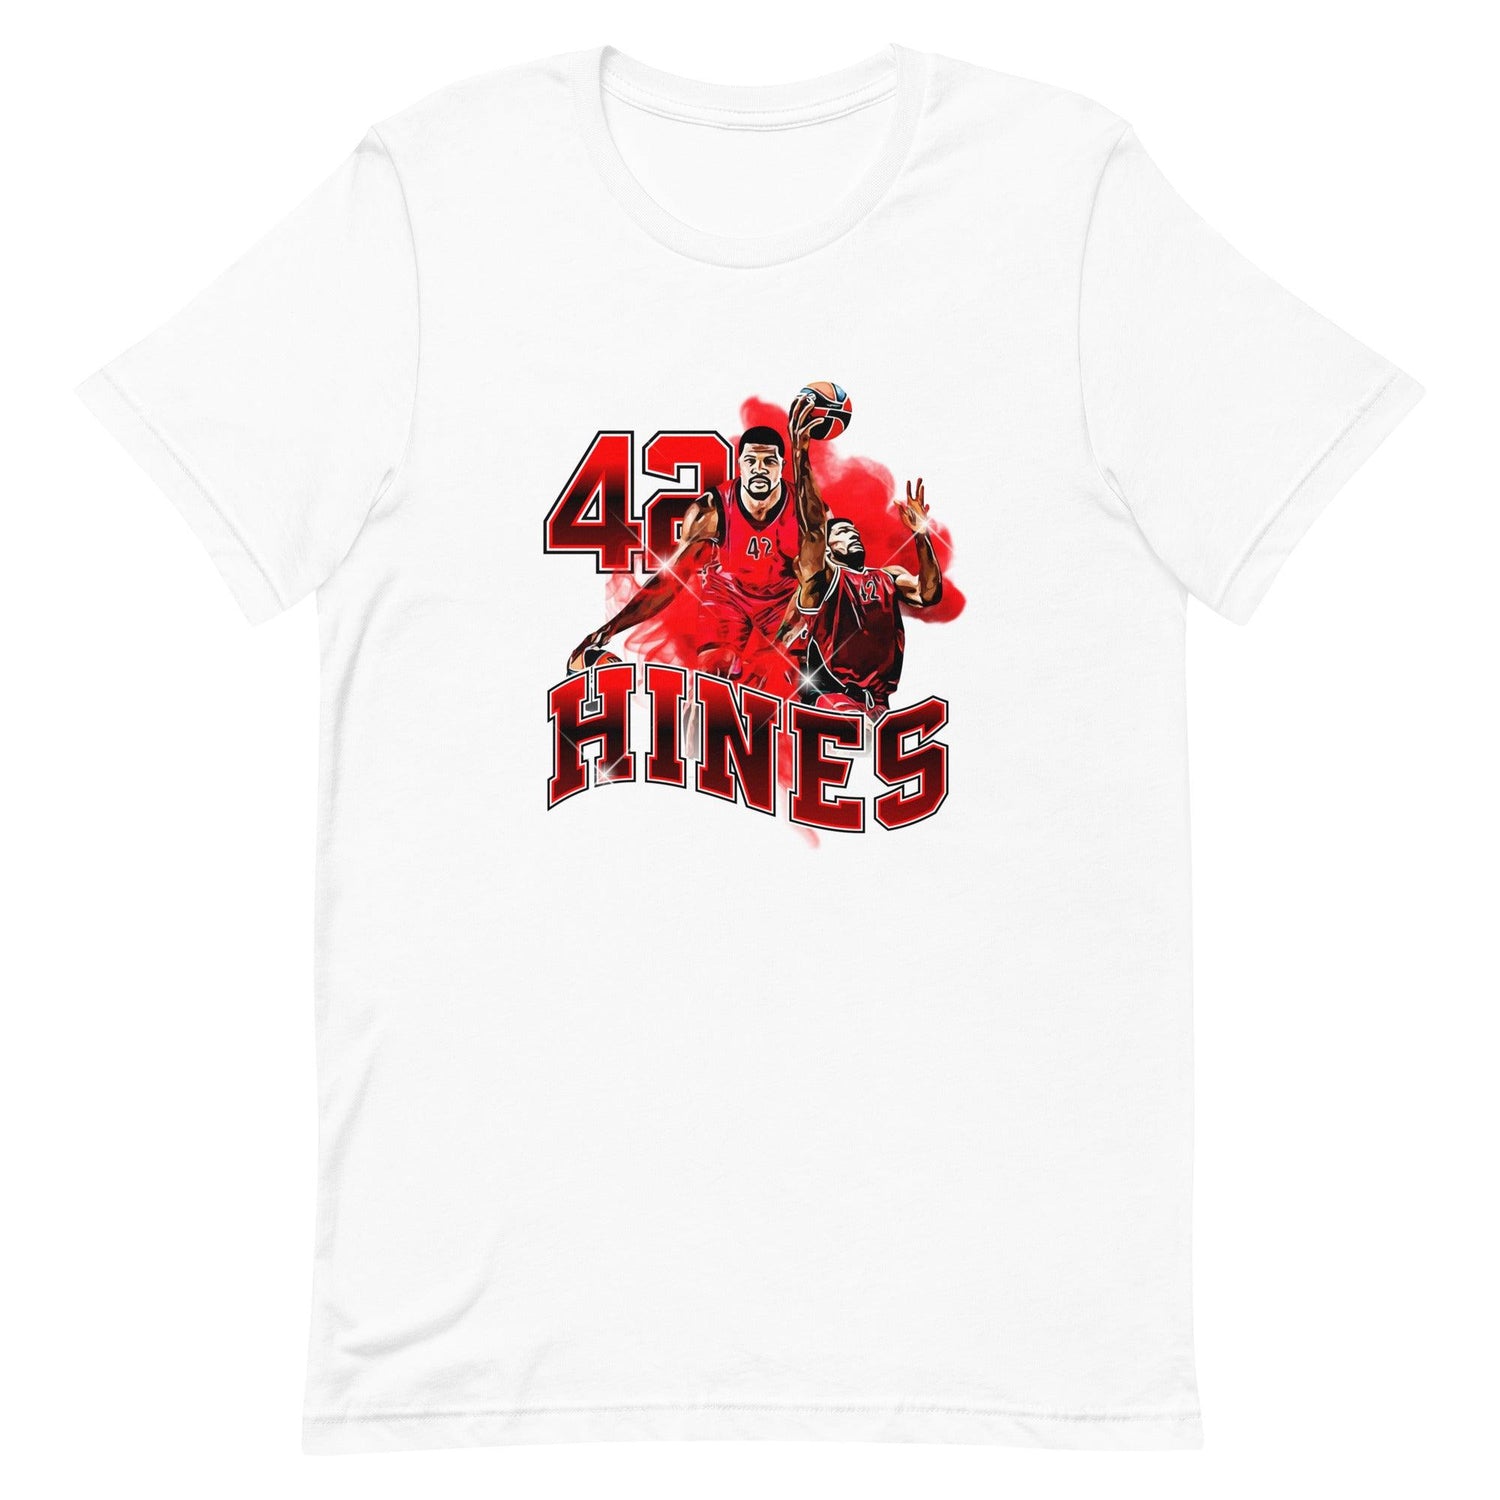 Kyle Hines "Career" t-shirt - Fan Arch